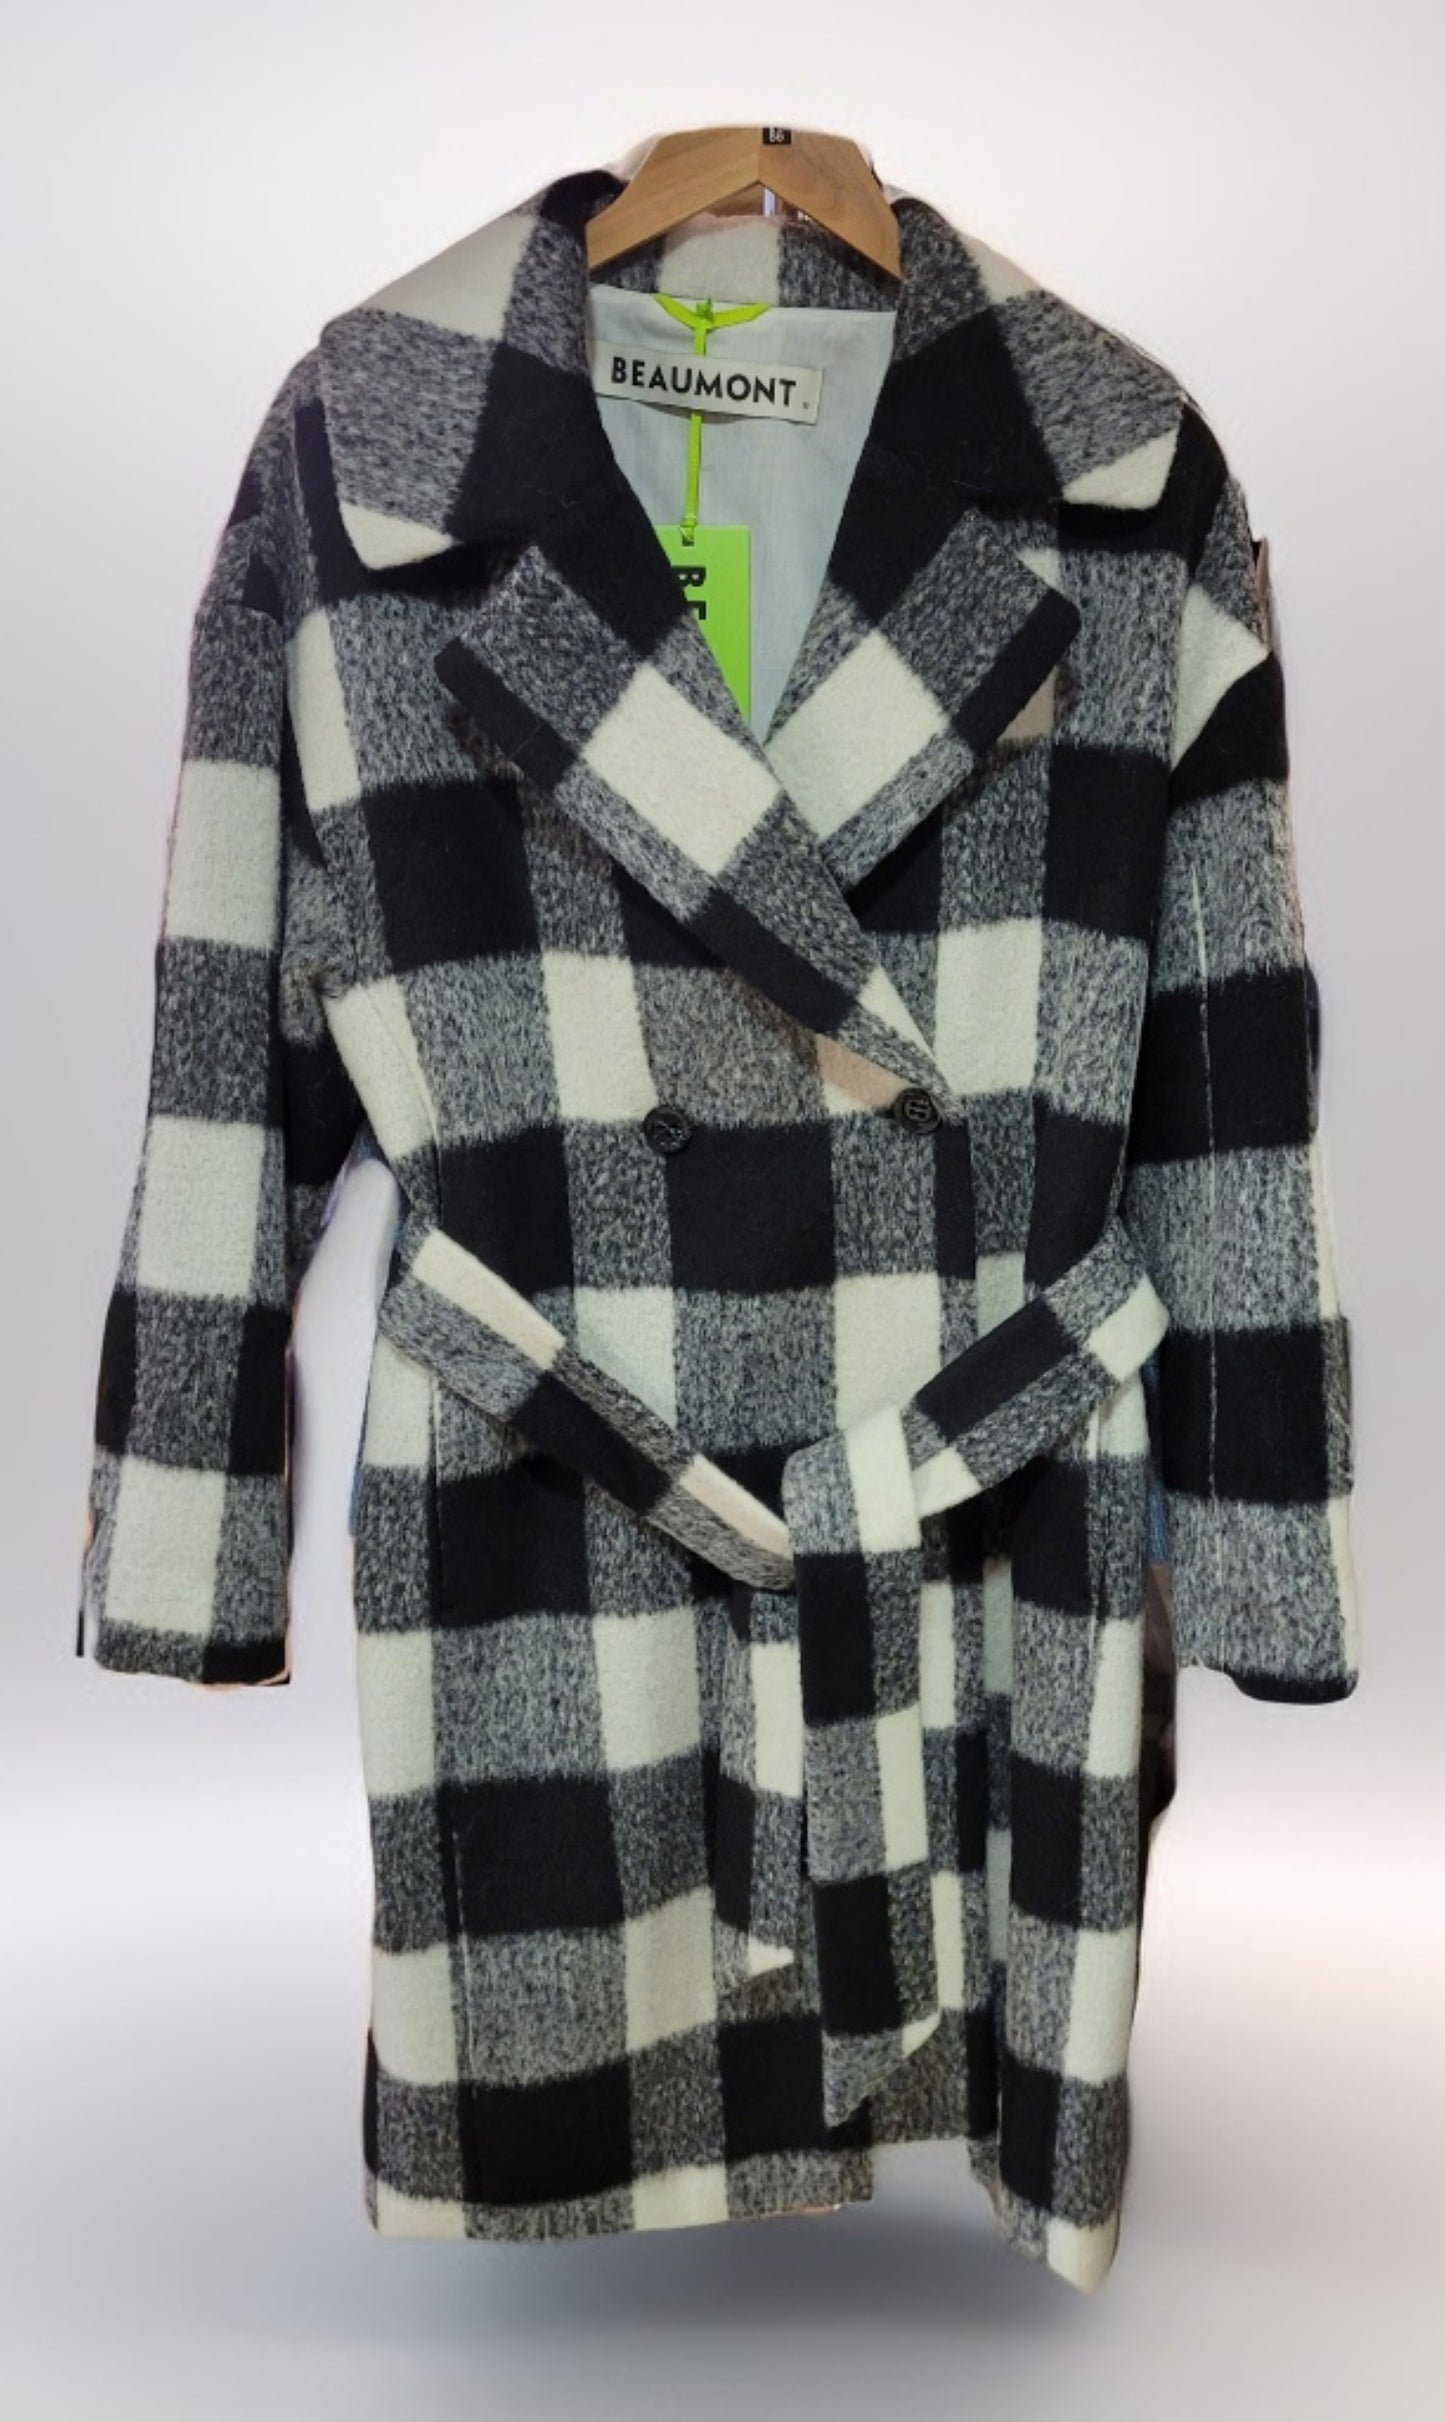 Beaumont pixie belted coat